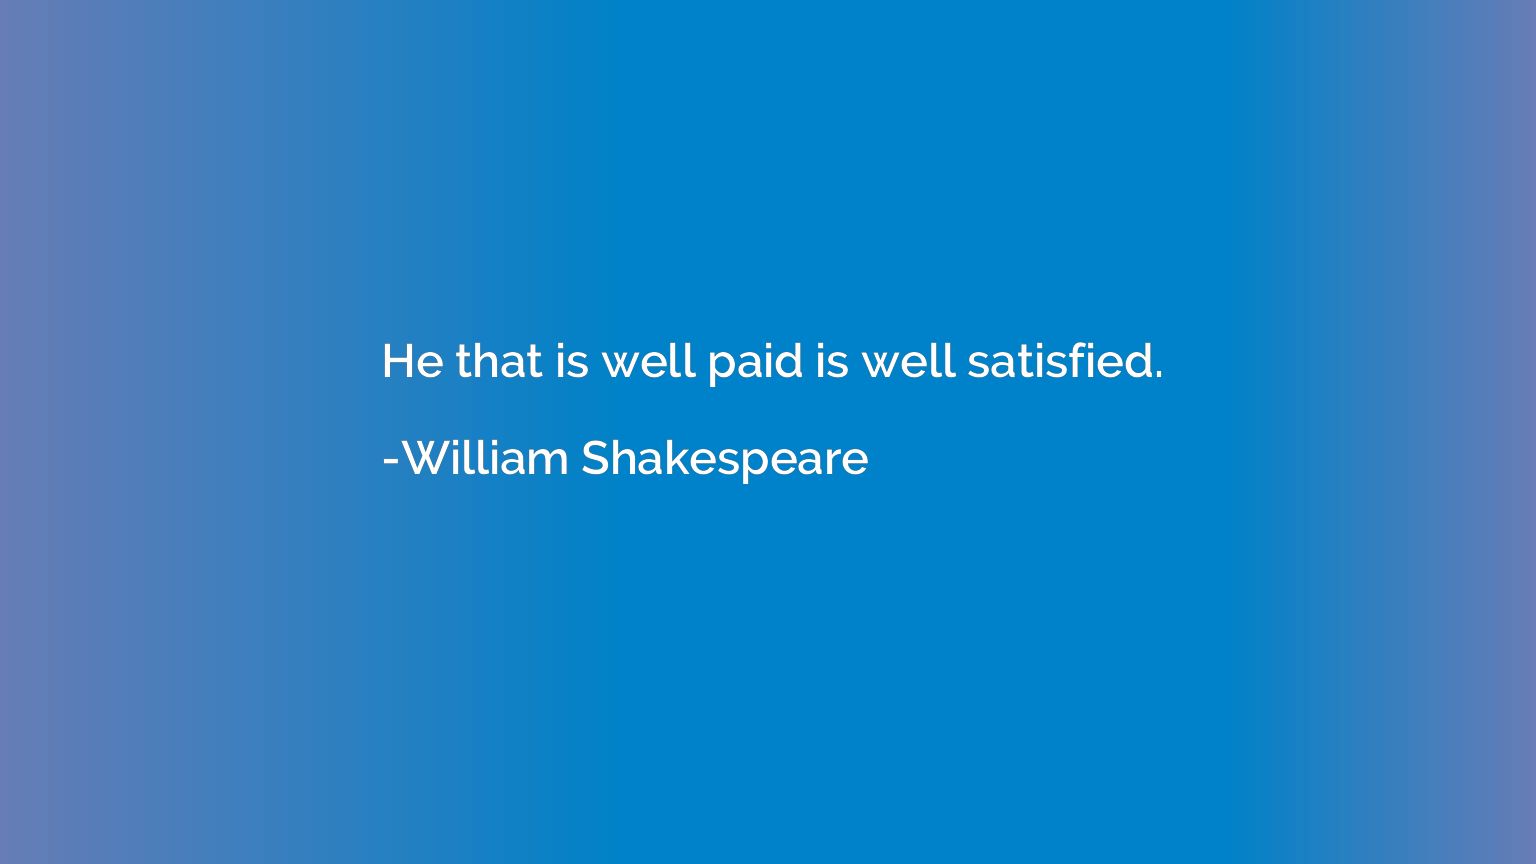 He that is well paid is well satisfied.